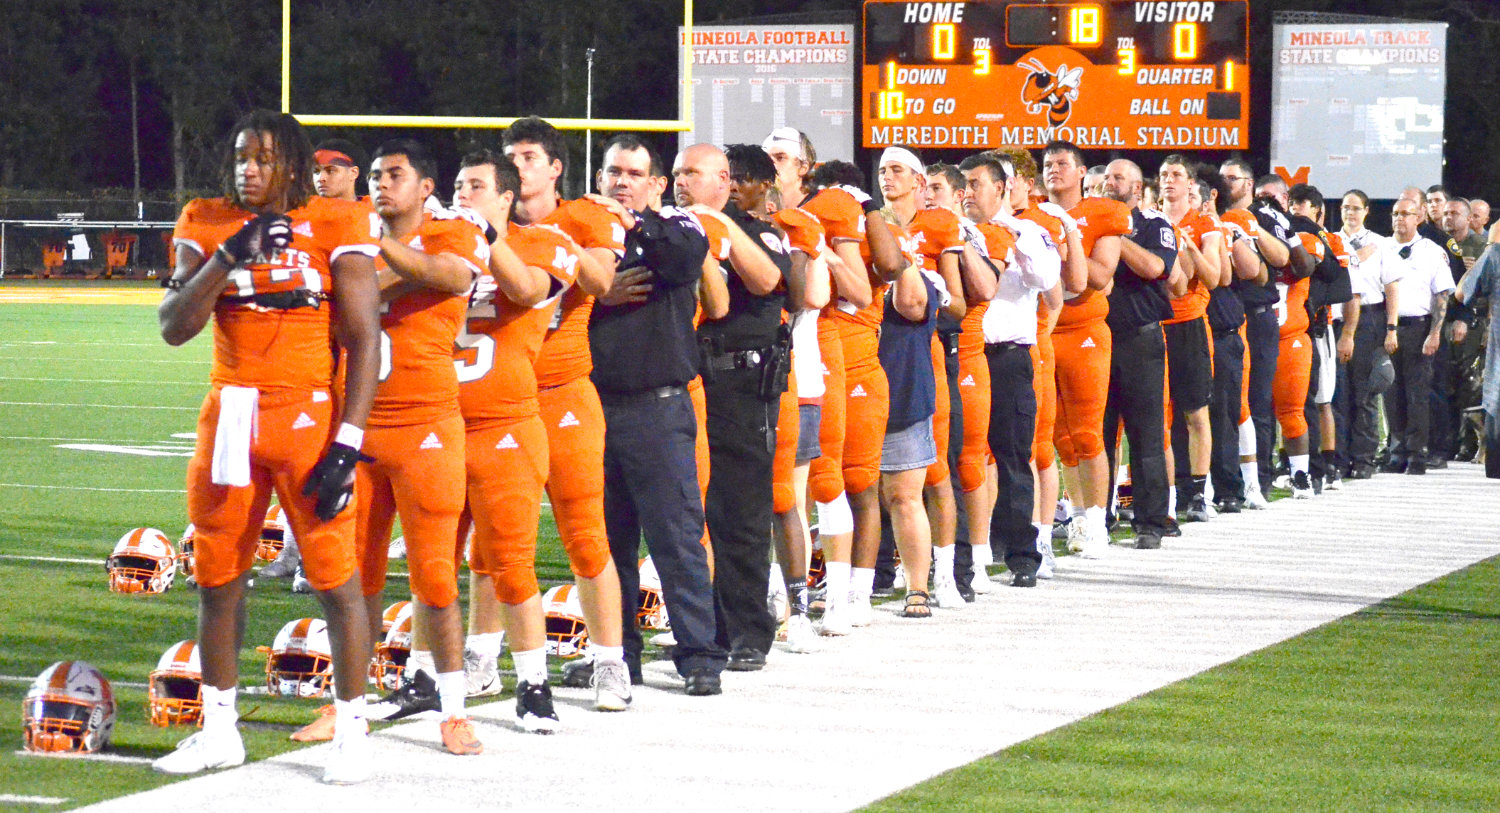 First responders join Mineola football players for the playing of the “National Anthem”prior to Friday’s football game. The Mineola ISD honored first responders before the game and also during the halftime ceremonies.